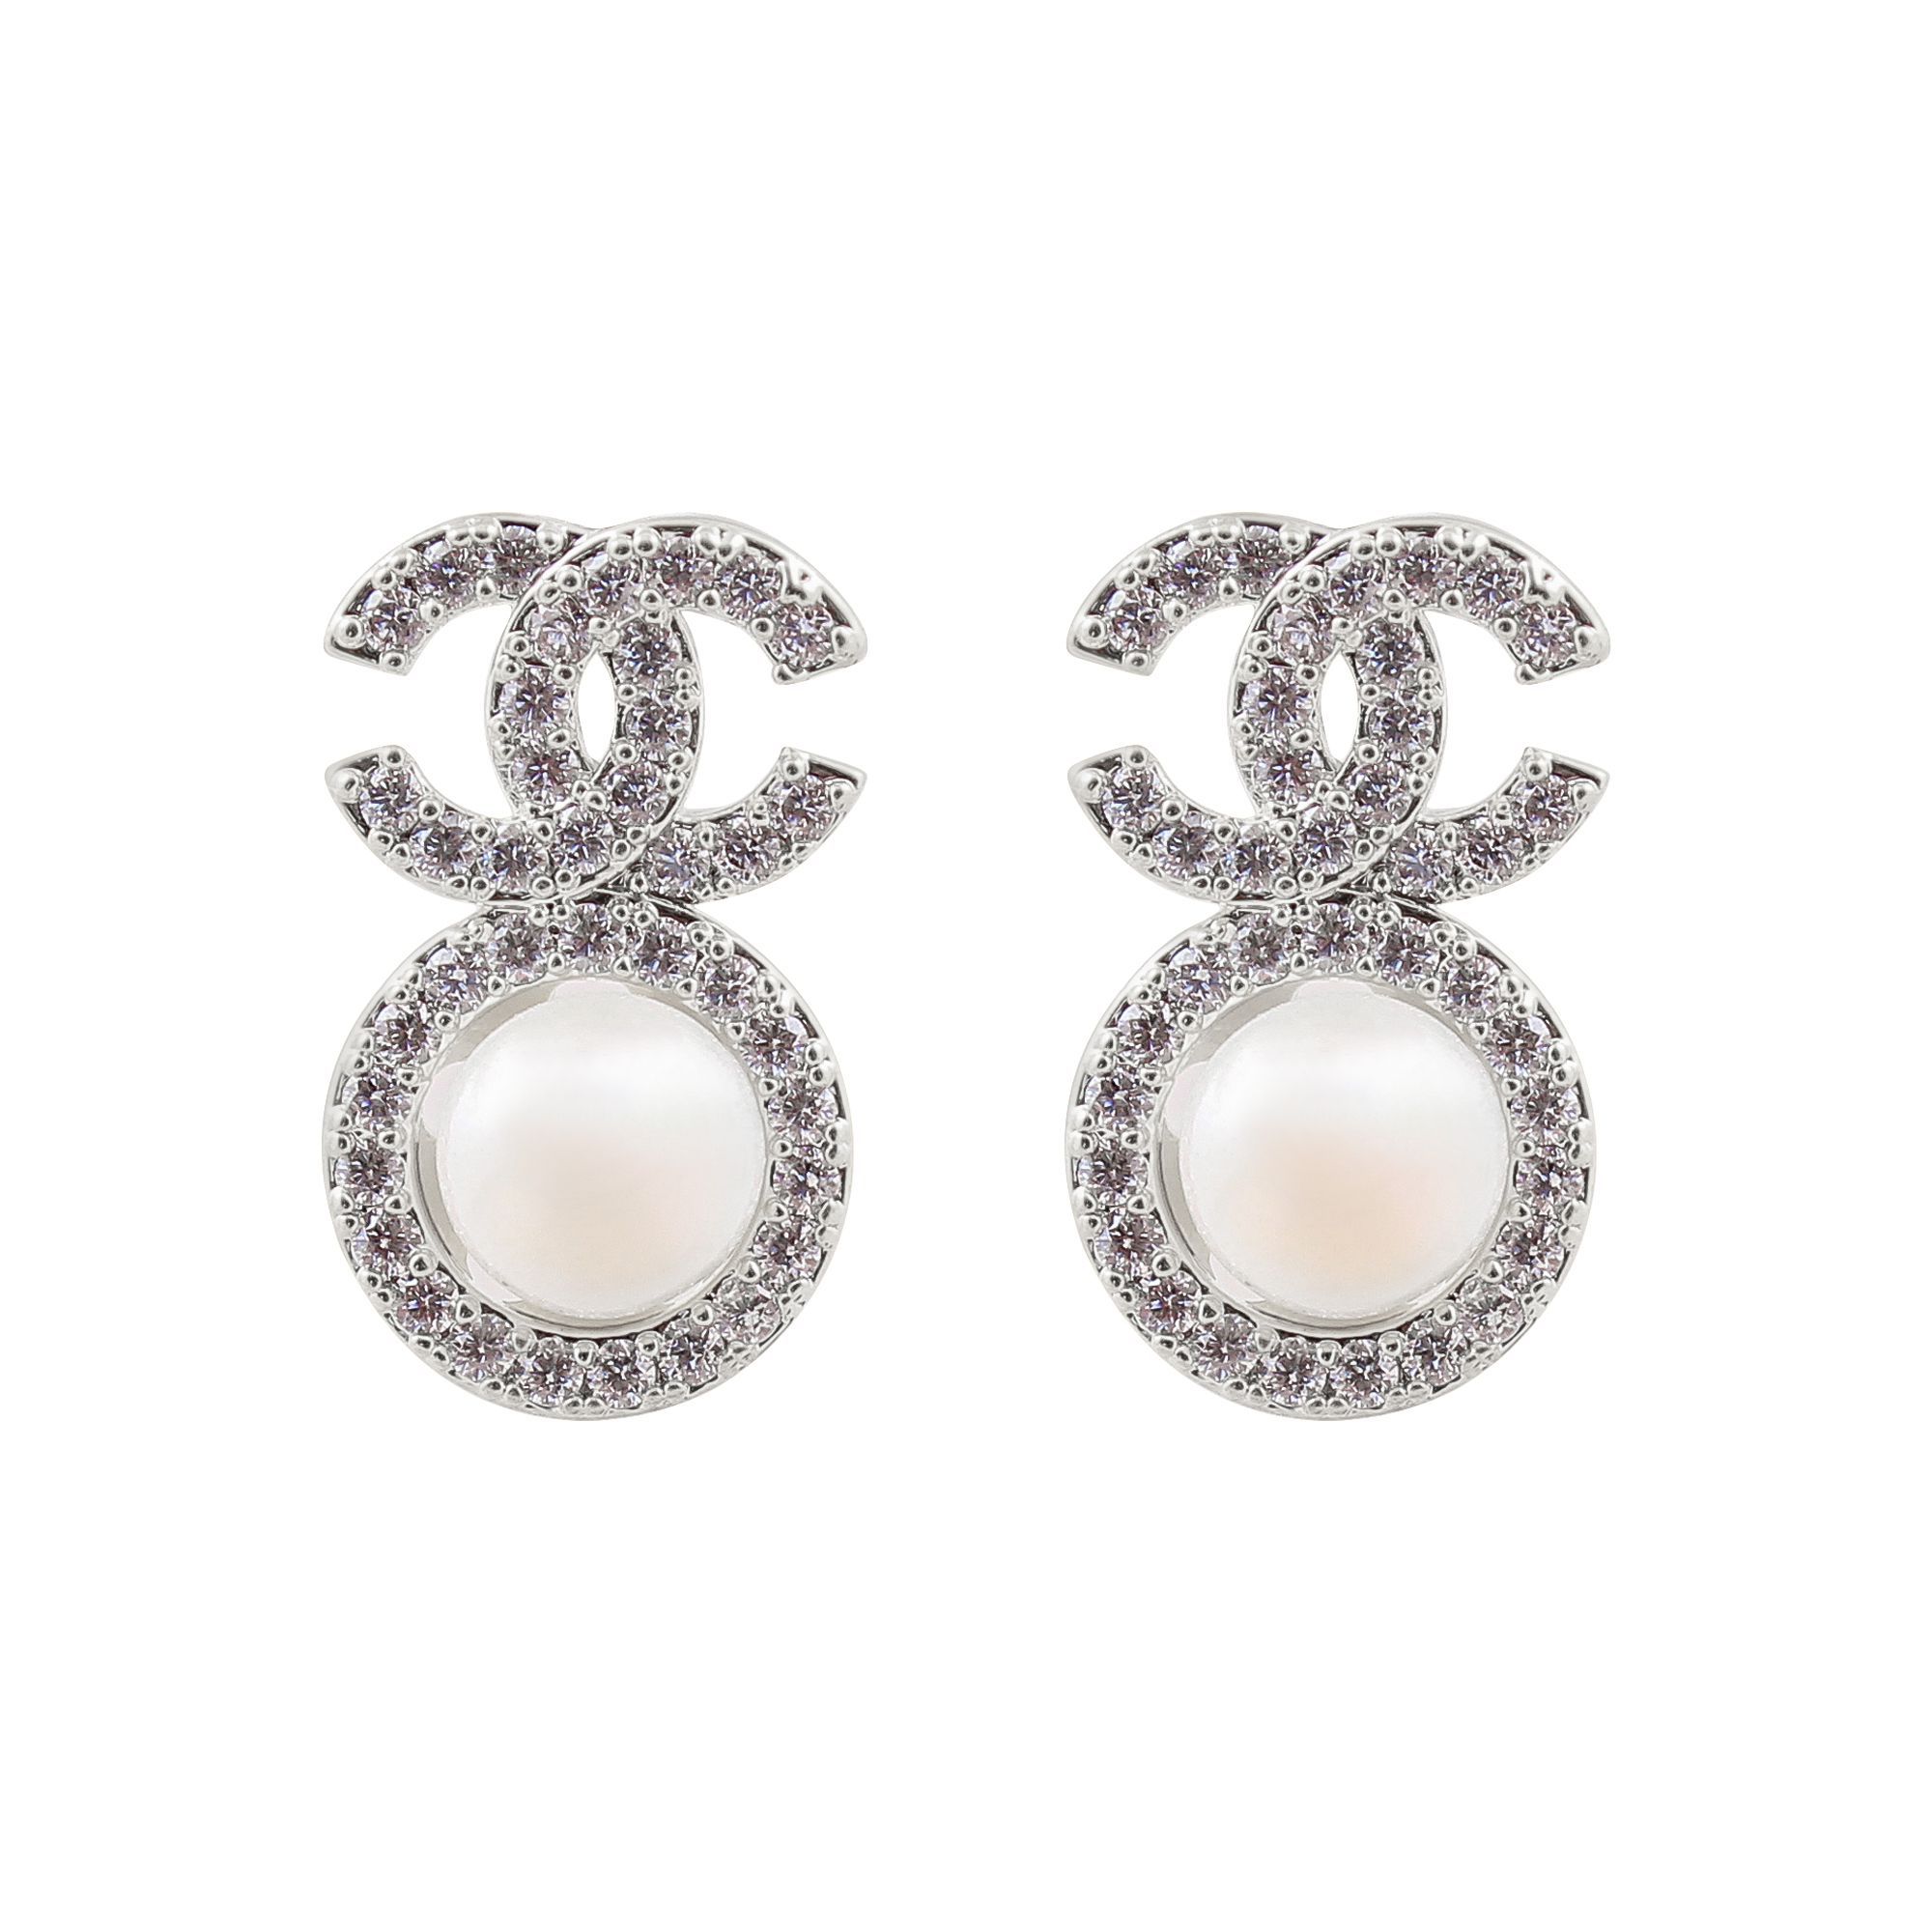 Buy Channel Style Girls Earrings, Silver, NS-071 Online at Best Price ...